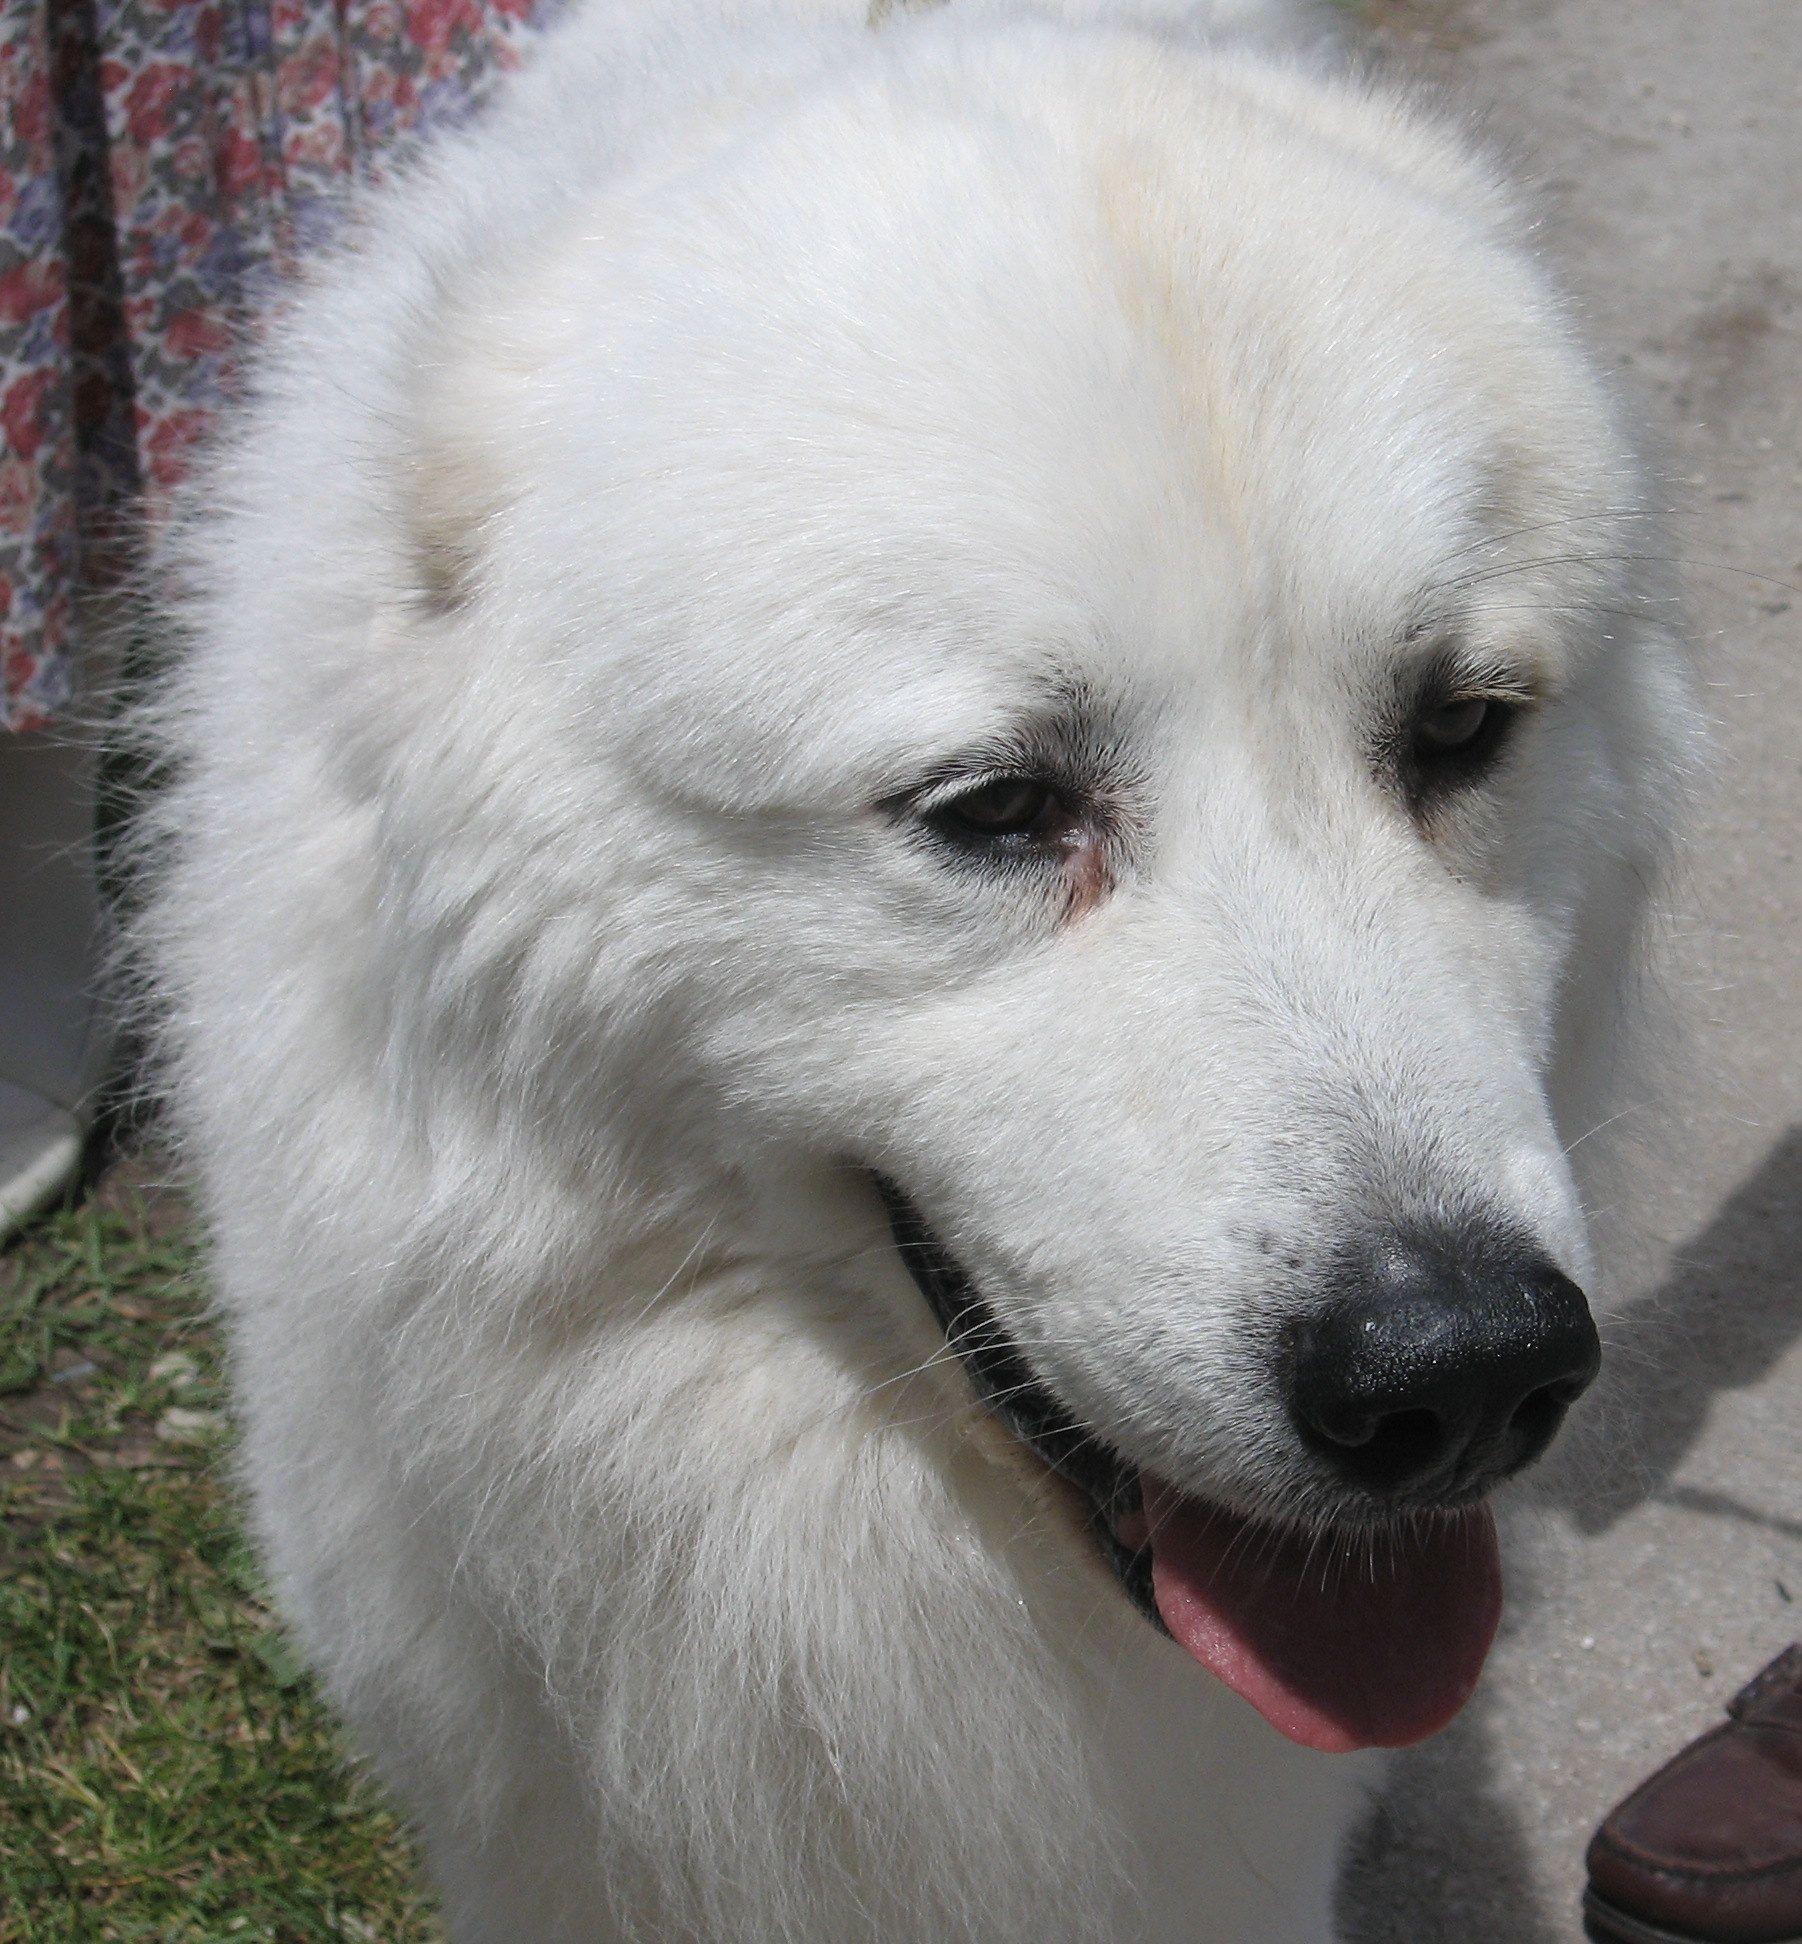 Great Pyrenees dog face photo and wallpaper. Beautiful Great Pyrenees dog face picture